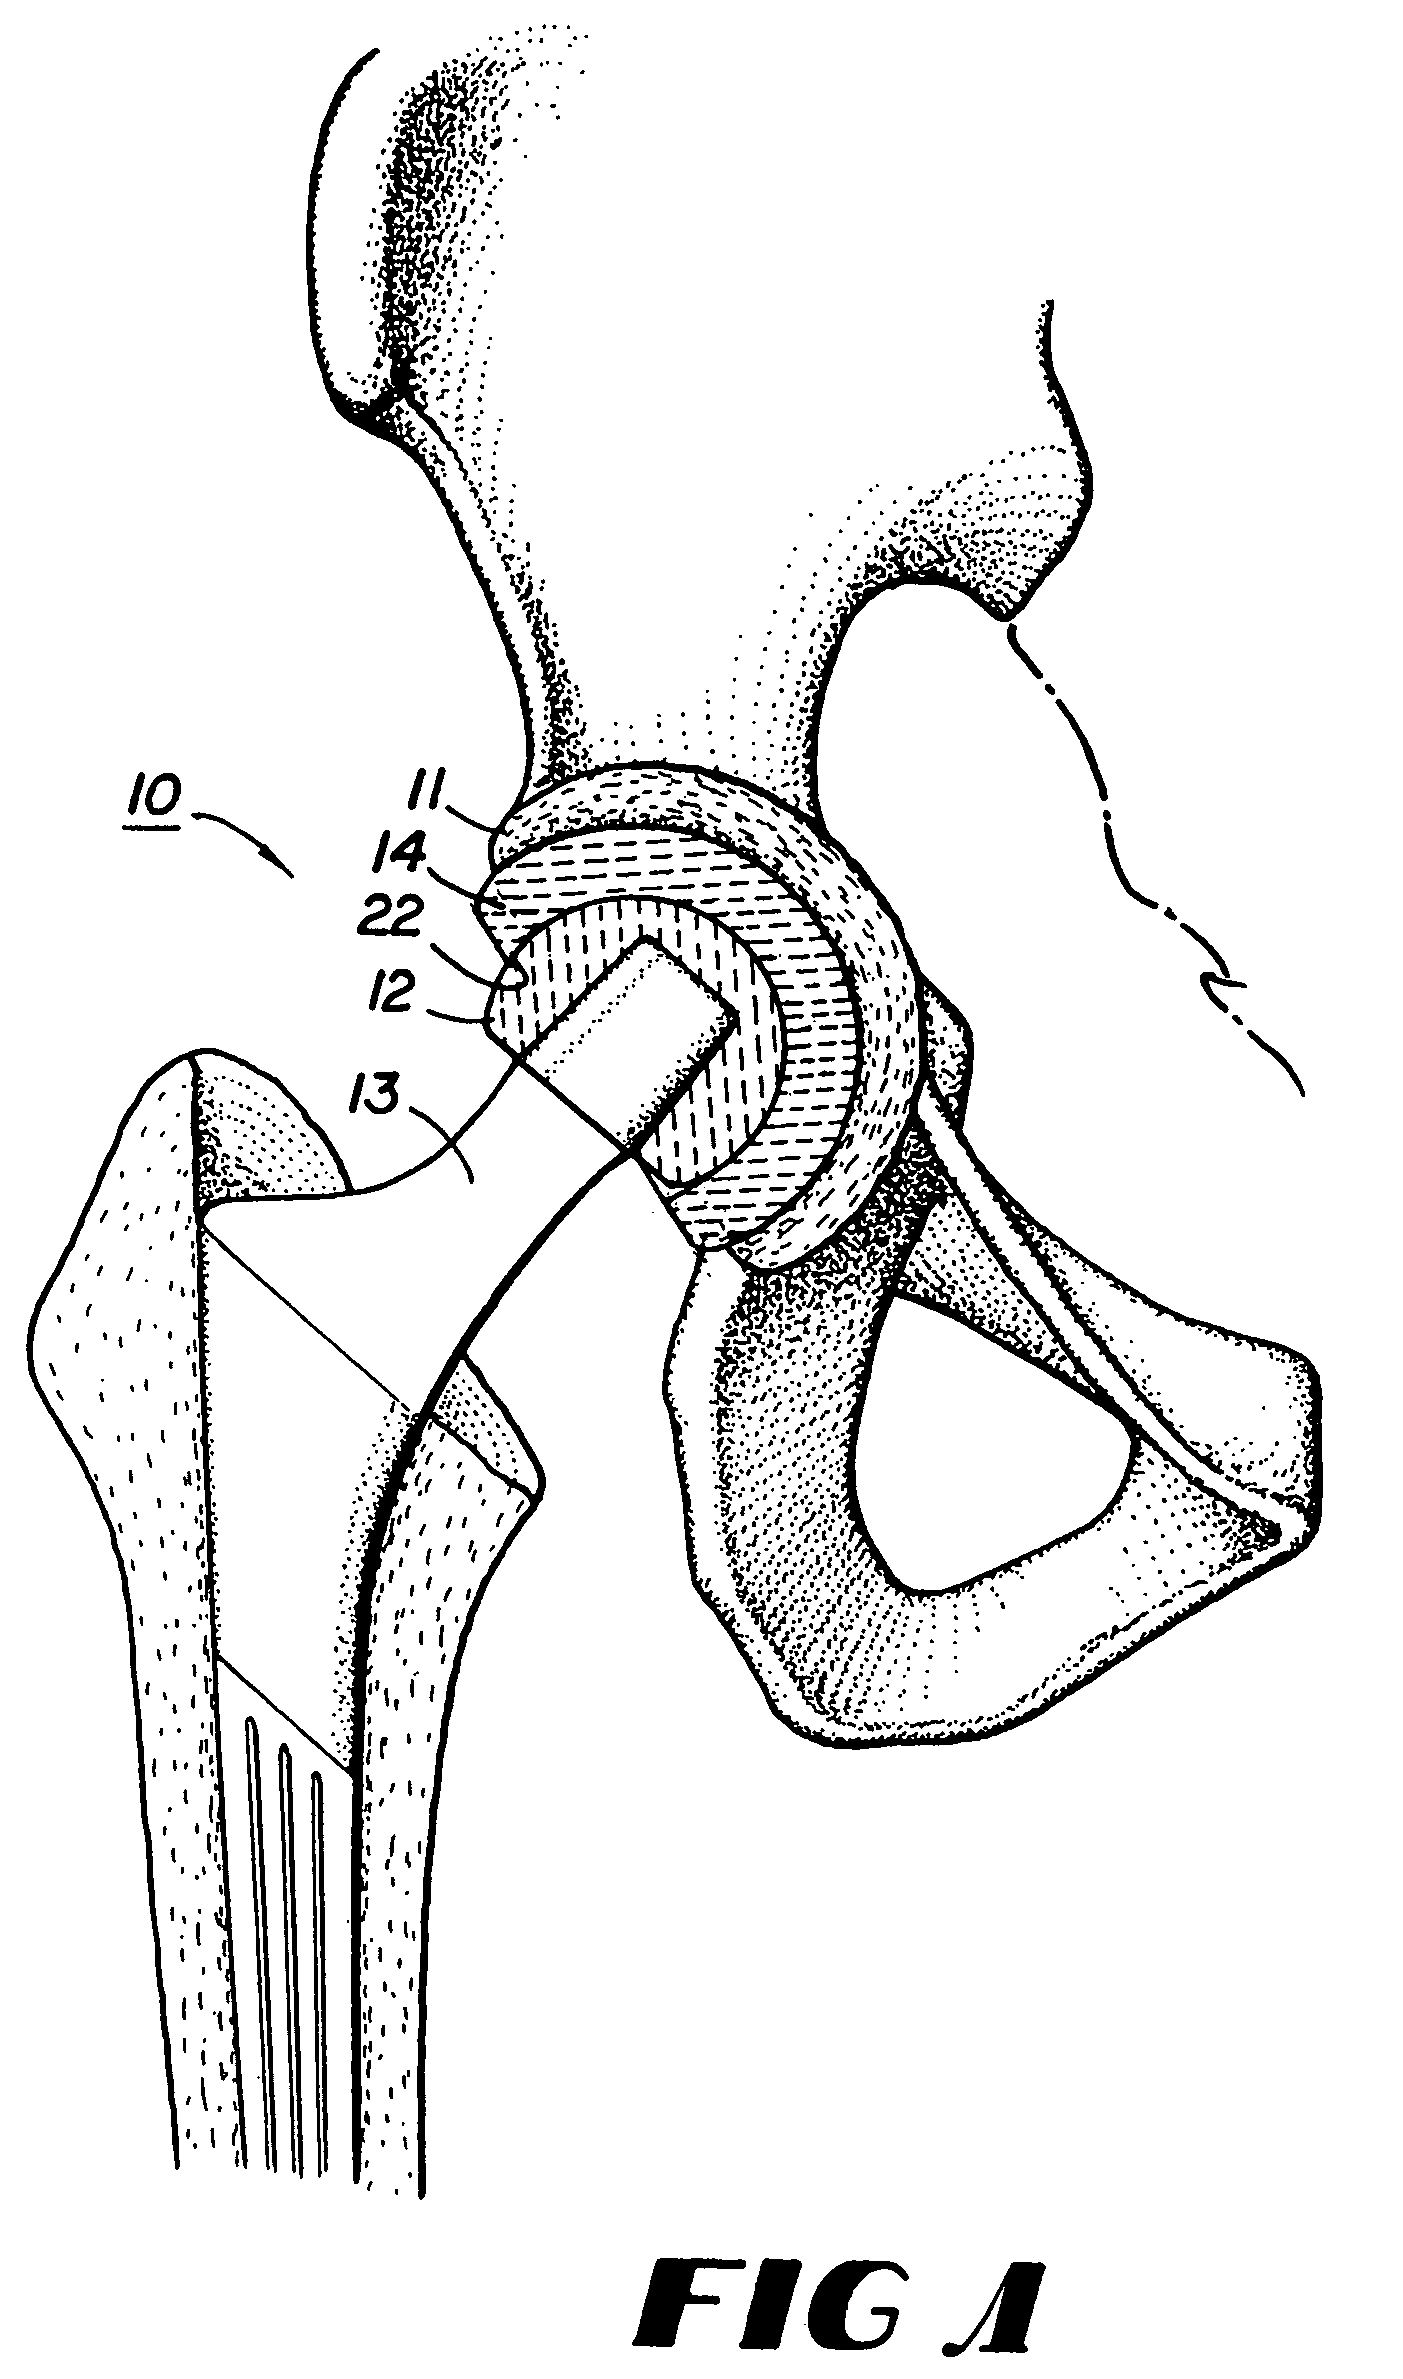 Containment system for constraining a prosthetic component